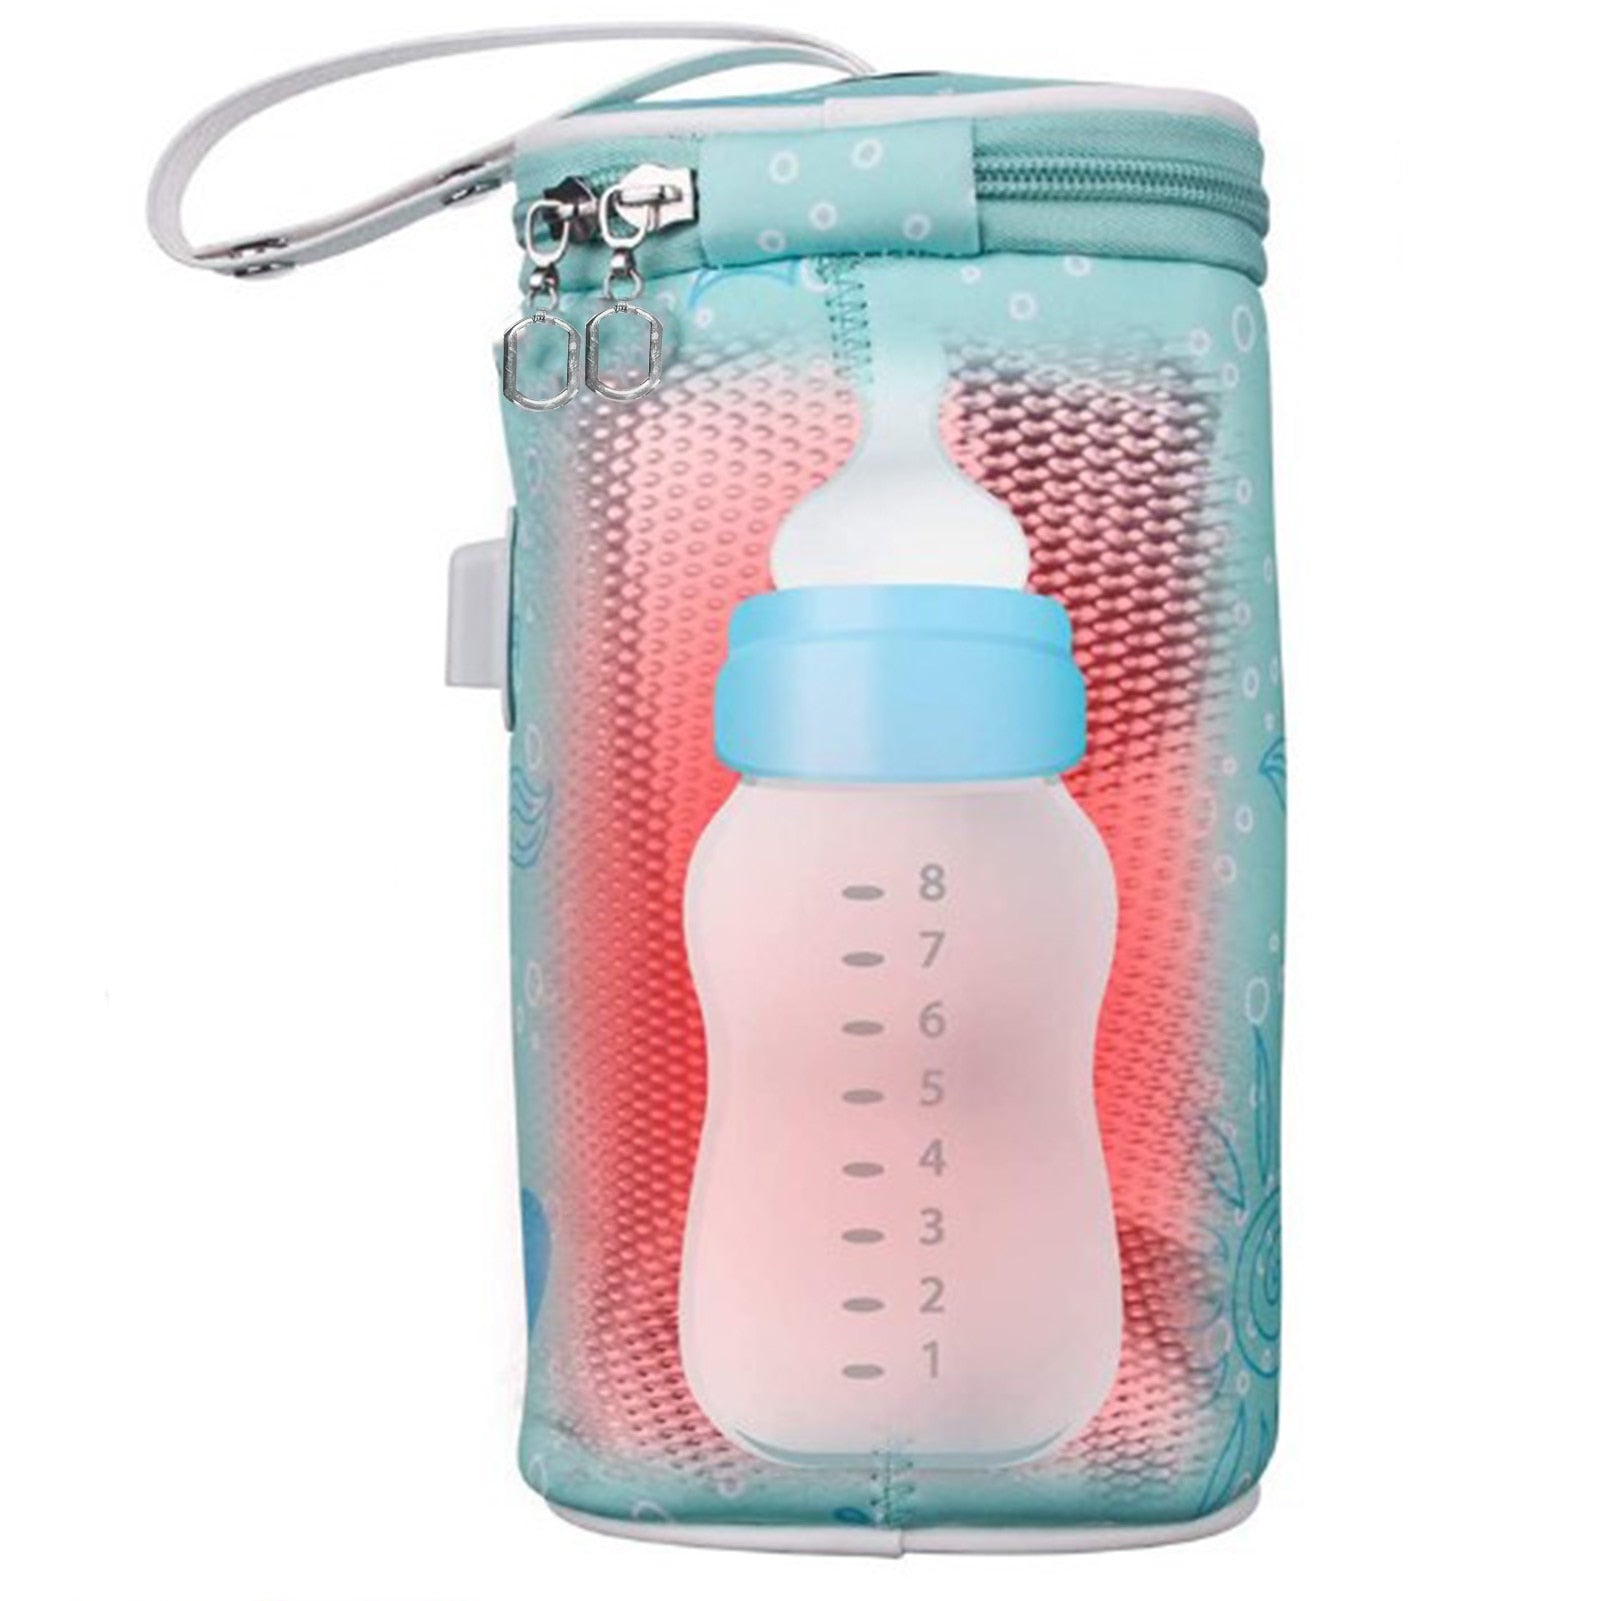 New Milk Usb Baby Bottle Warmer Car Heater Food Feeding Heat Insulated Thermal Insulation Bag Stroller Accessories Bags